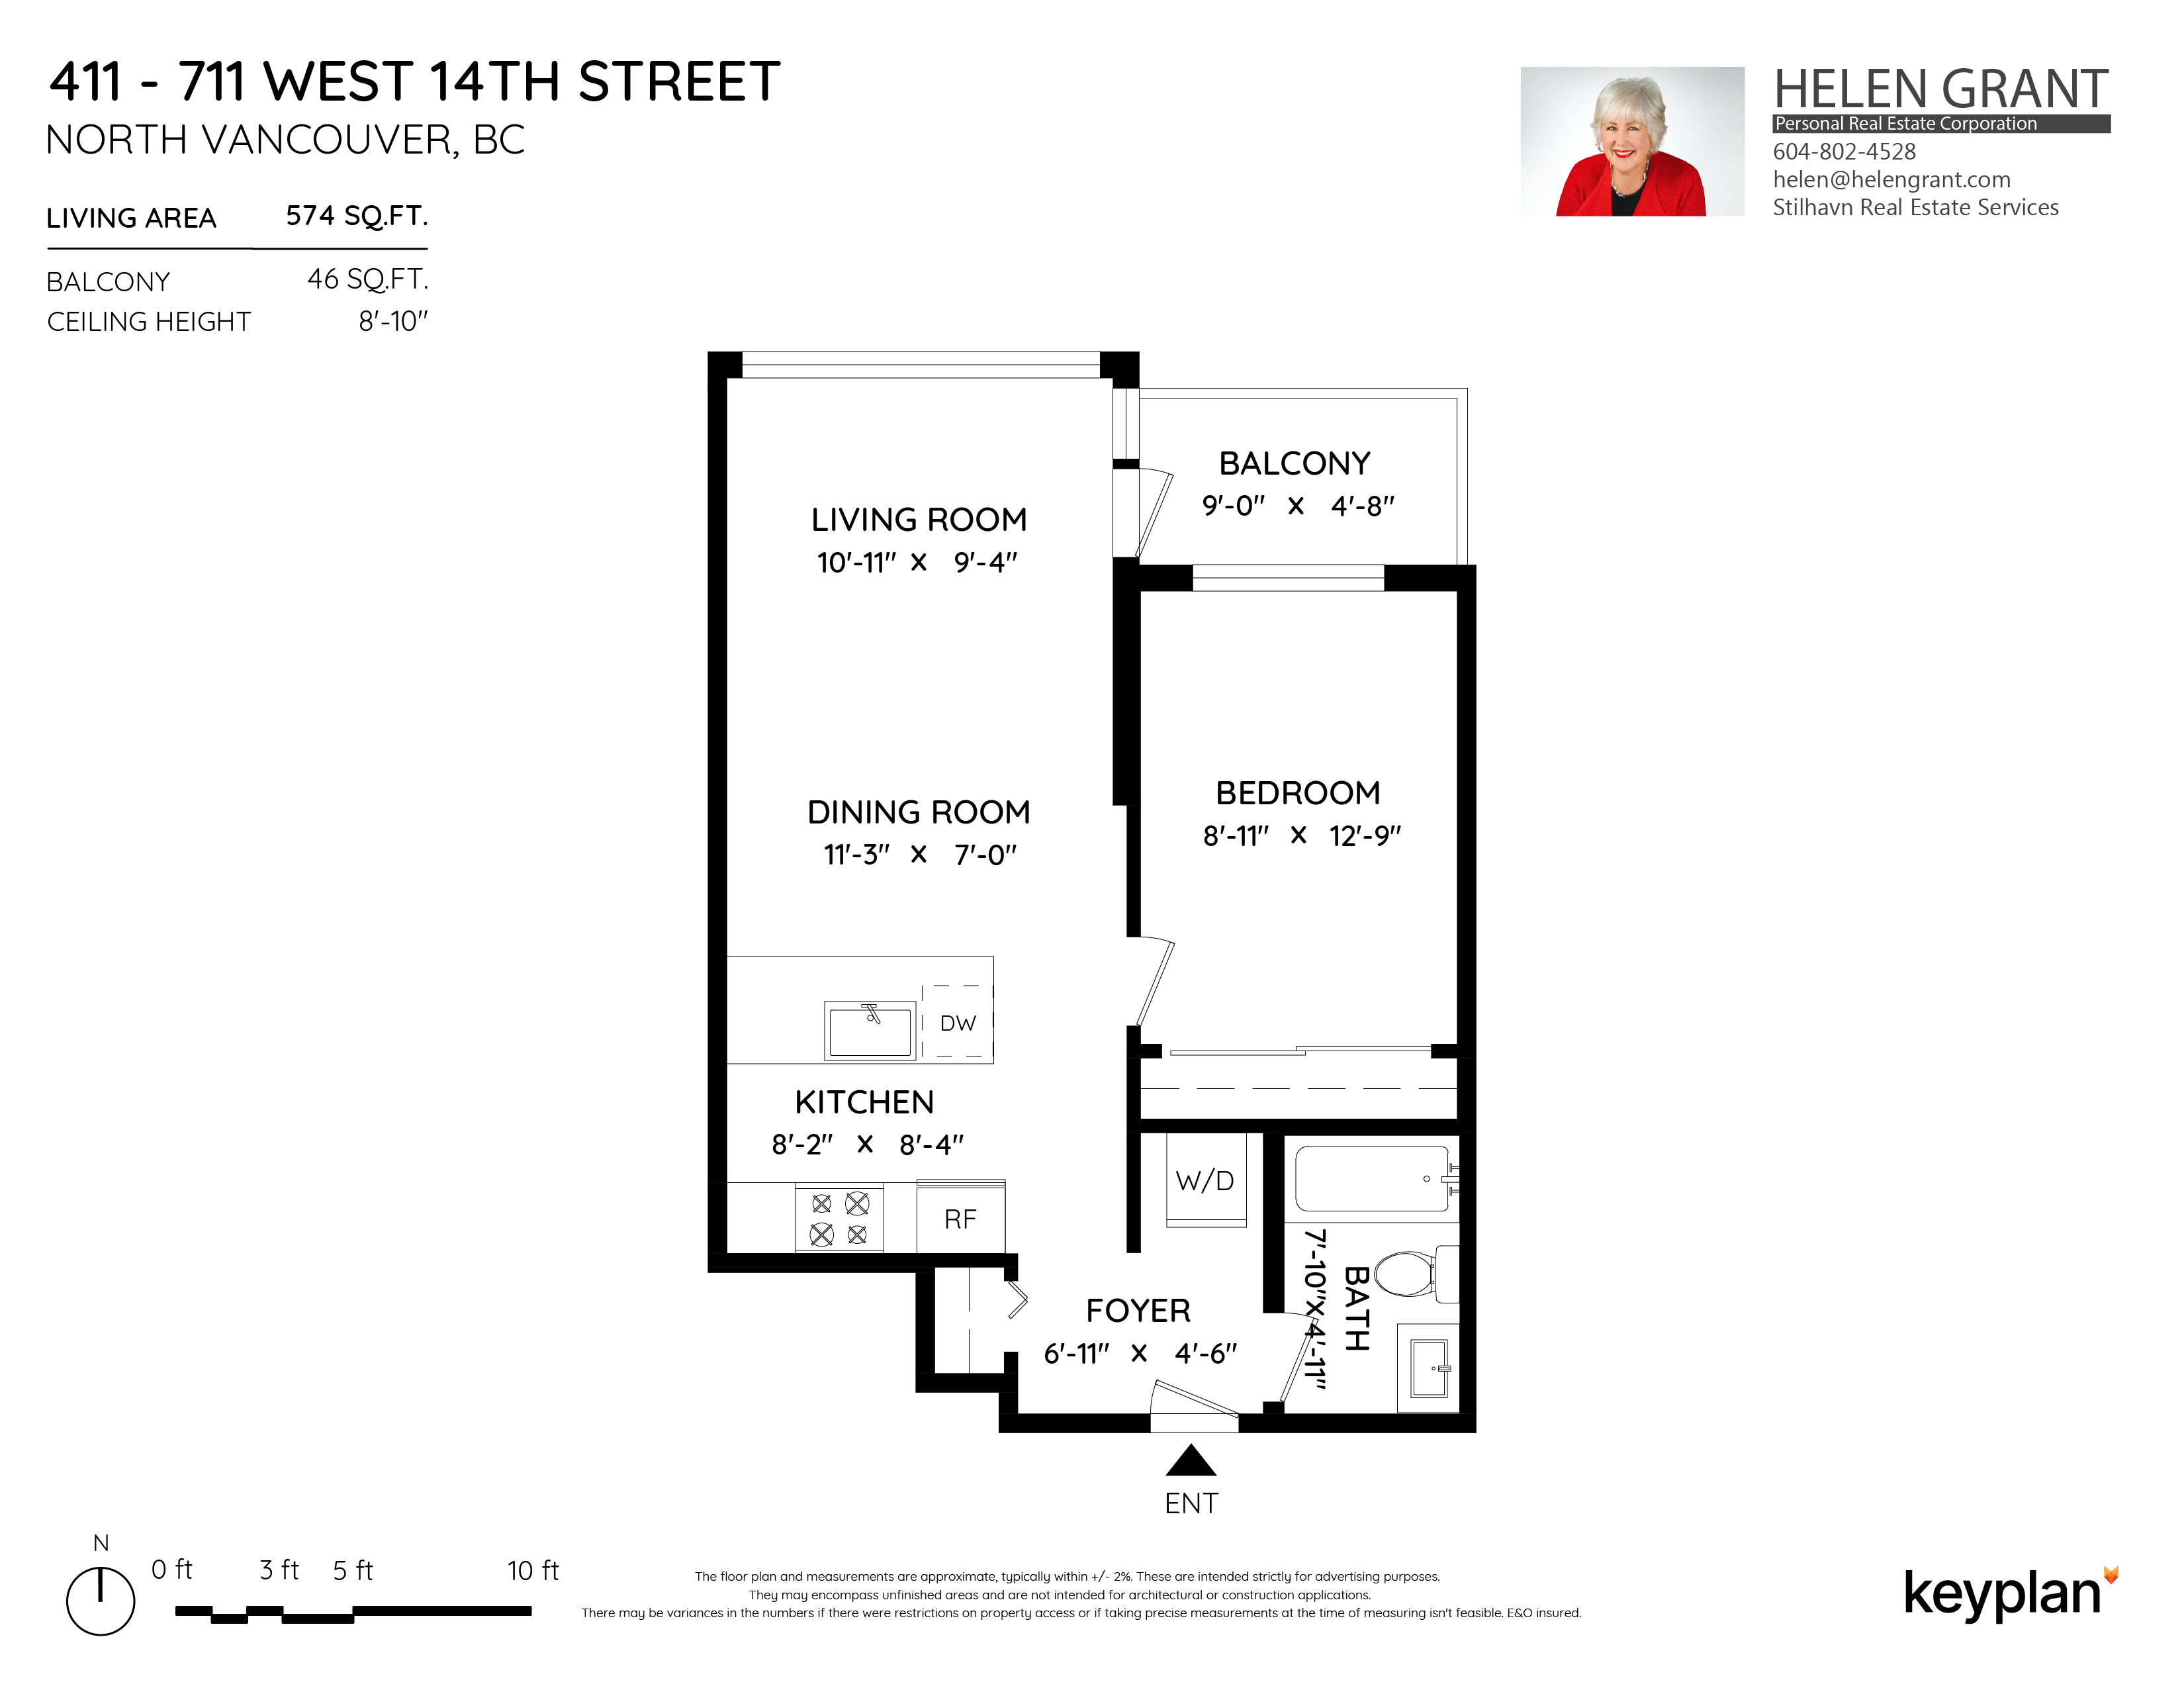 Helen Grant - Unit 411 - 711 West 14th Street, North Vancouver, BC, Canada | Floor Plan 1